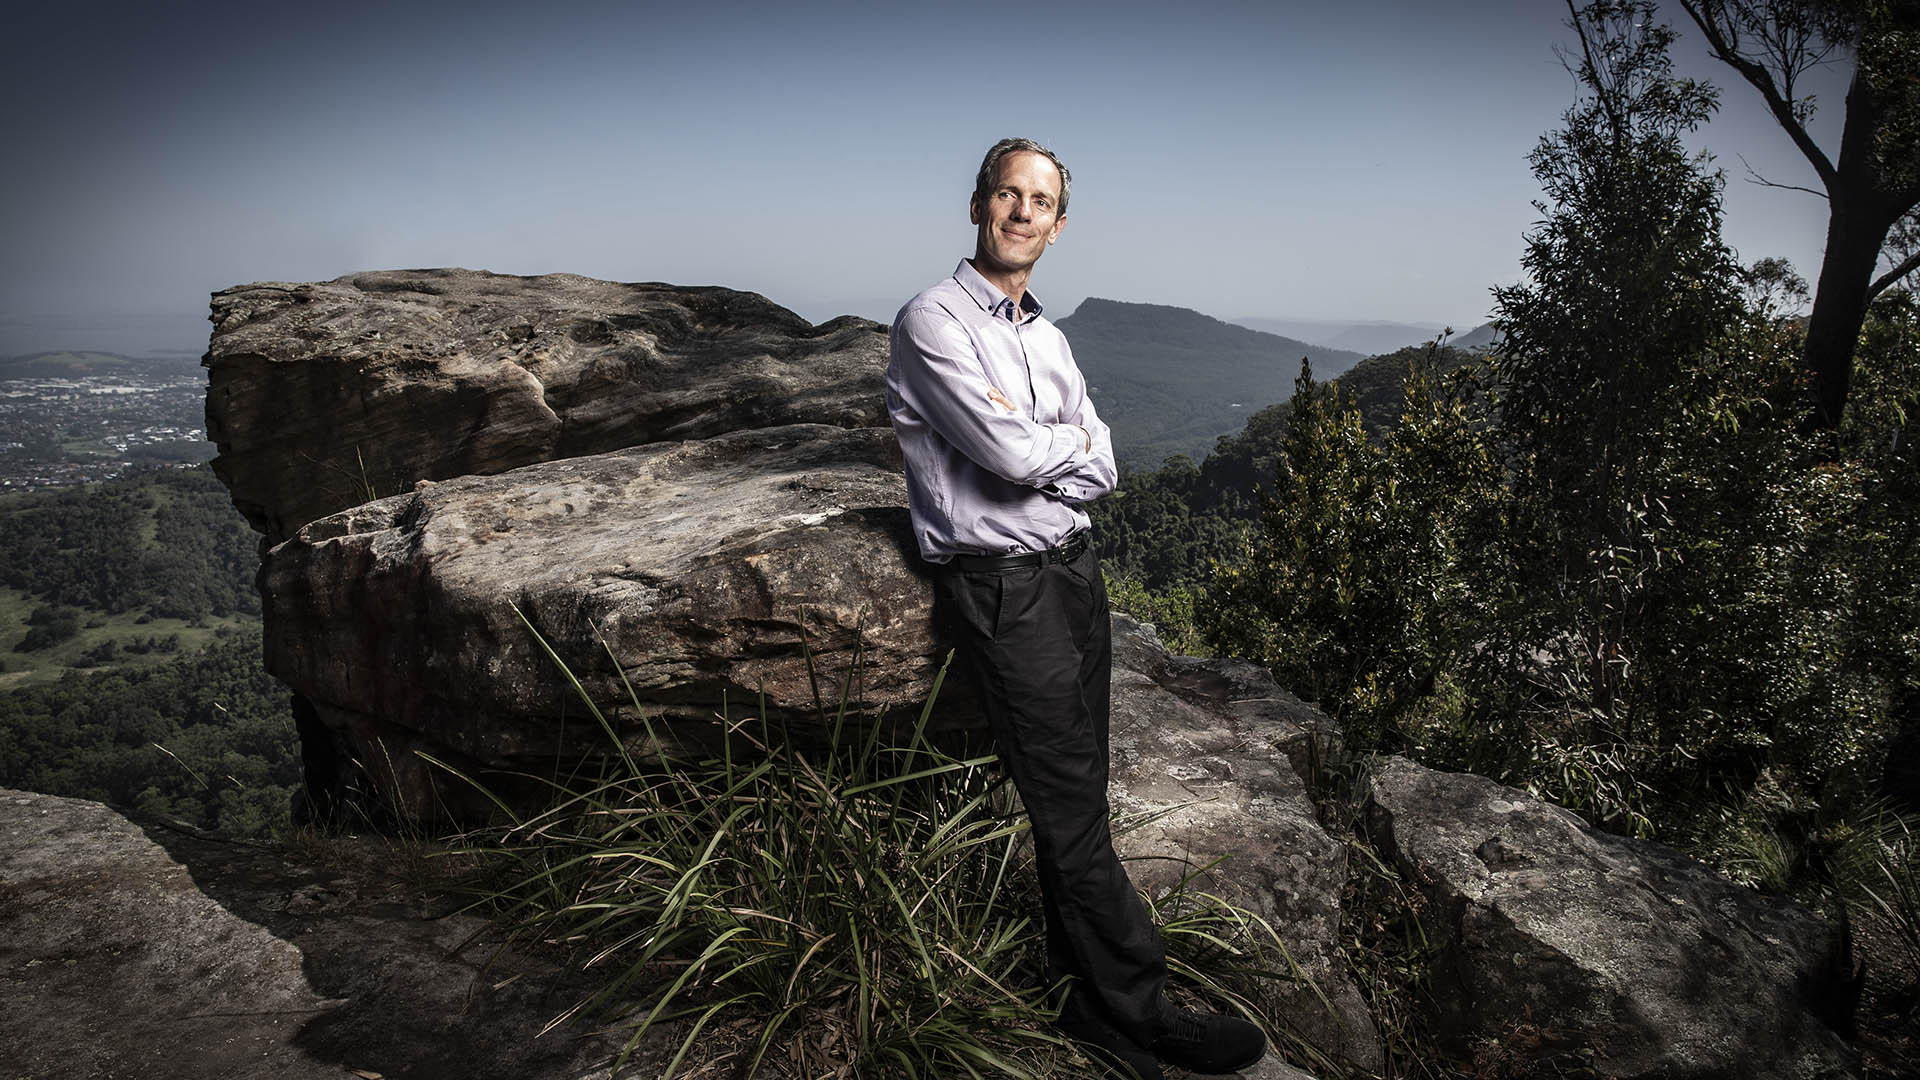 The Australian Academy of Science has awarded University of Wollongong (UOW) academic Dr Nicolas Flament the prestigious 2021 Anton Hales Medal in recognition of his outstanding contribution to the geosciences.